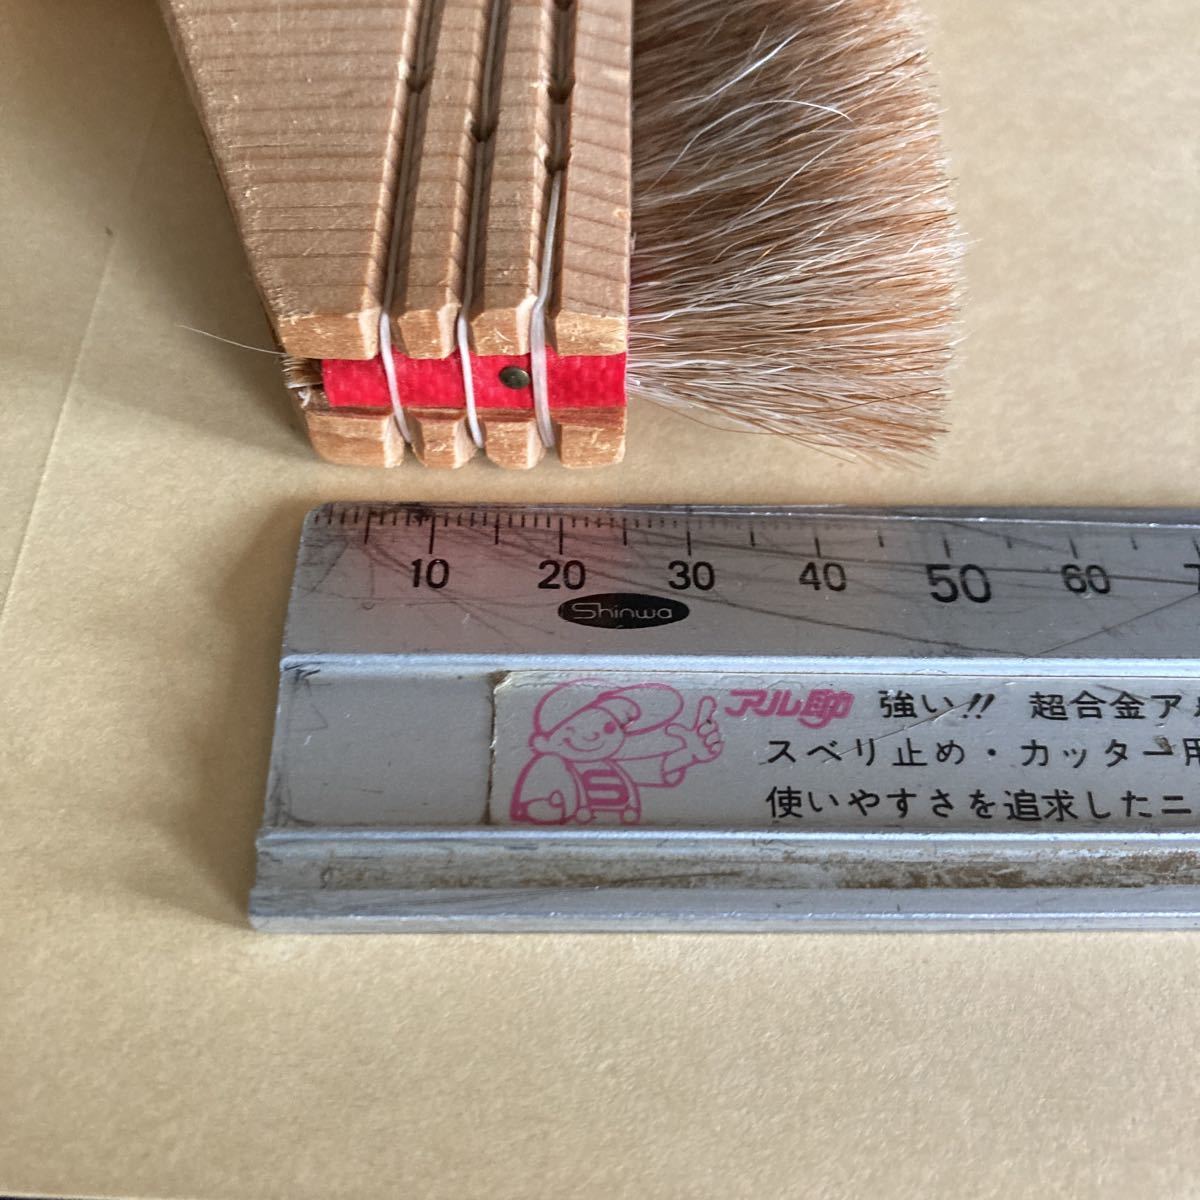 . special selection rubber paint brush ( Edo type )5 size 115-5 1 piece 